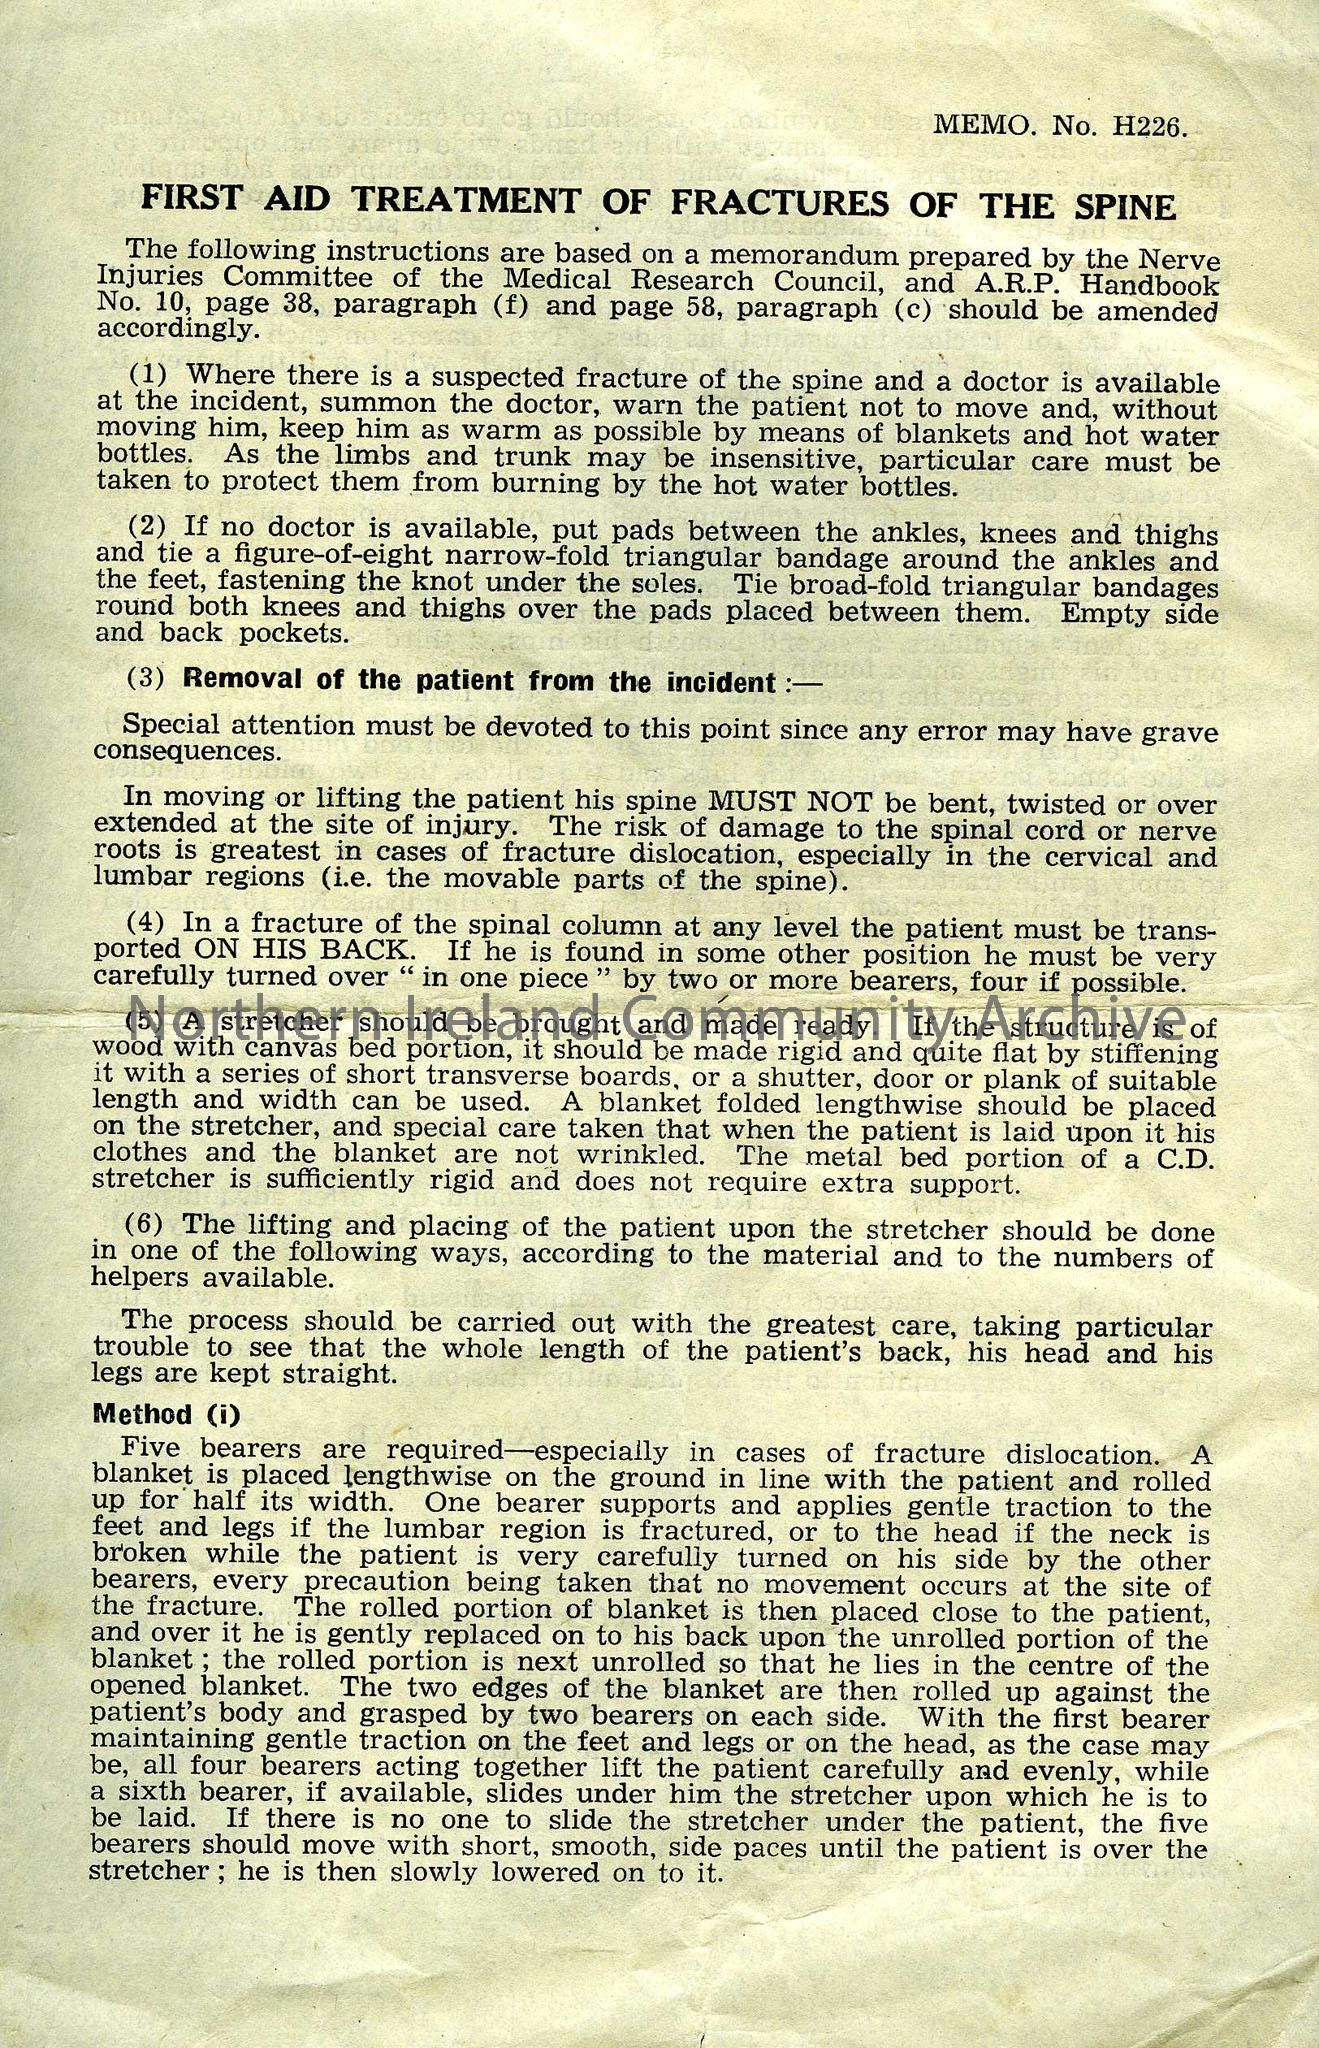 Information leaflet titled “First Aid Treatment of Fractures of the Spine” written by James Boyd, Chief Medical Adviser, June, 1944. To be distributed…